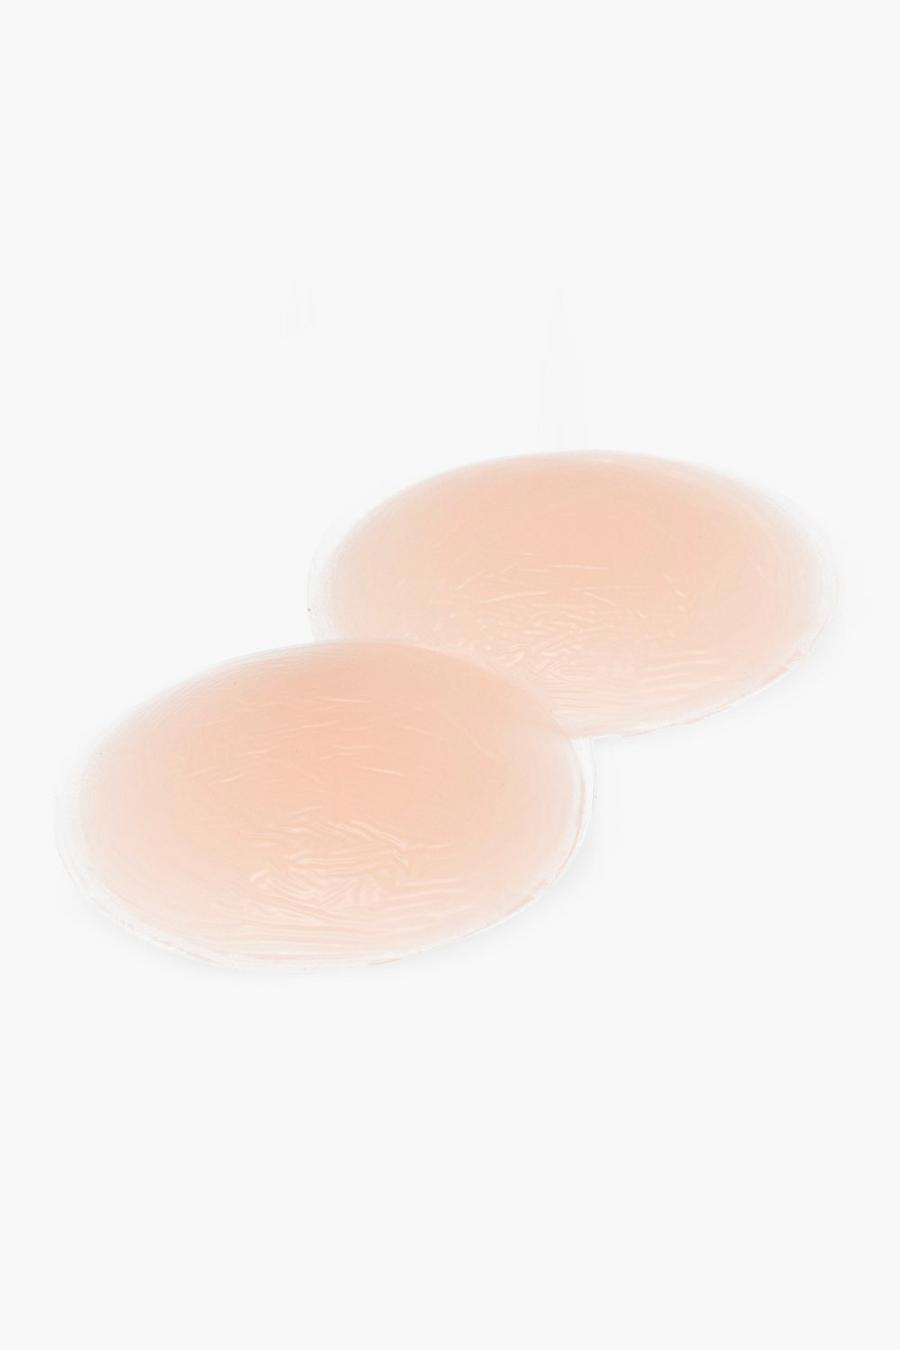 Silicone Nipple Covers Nipple Covers Reusable Adhesive Silicone